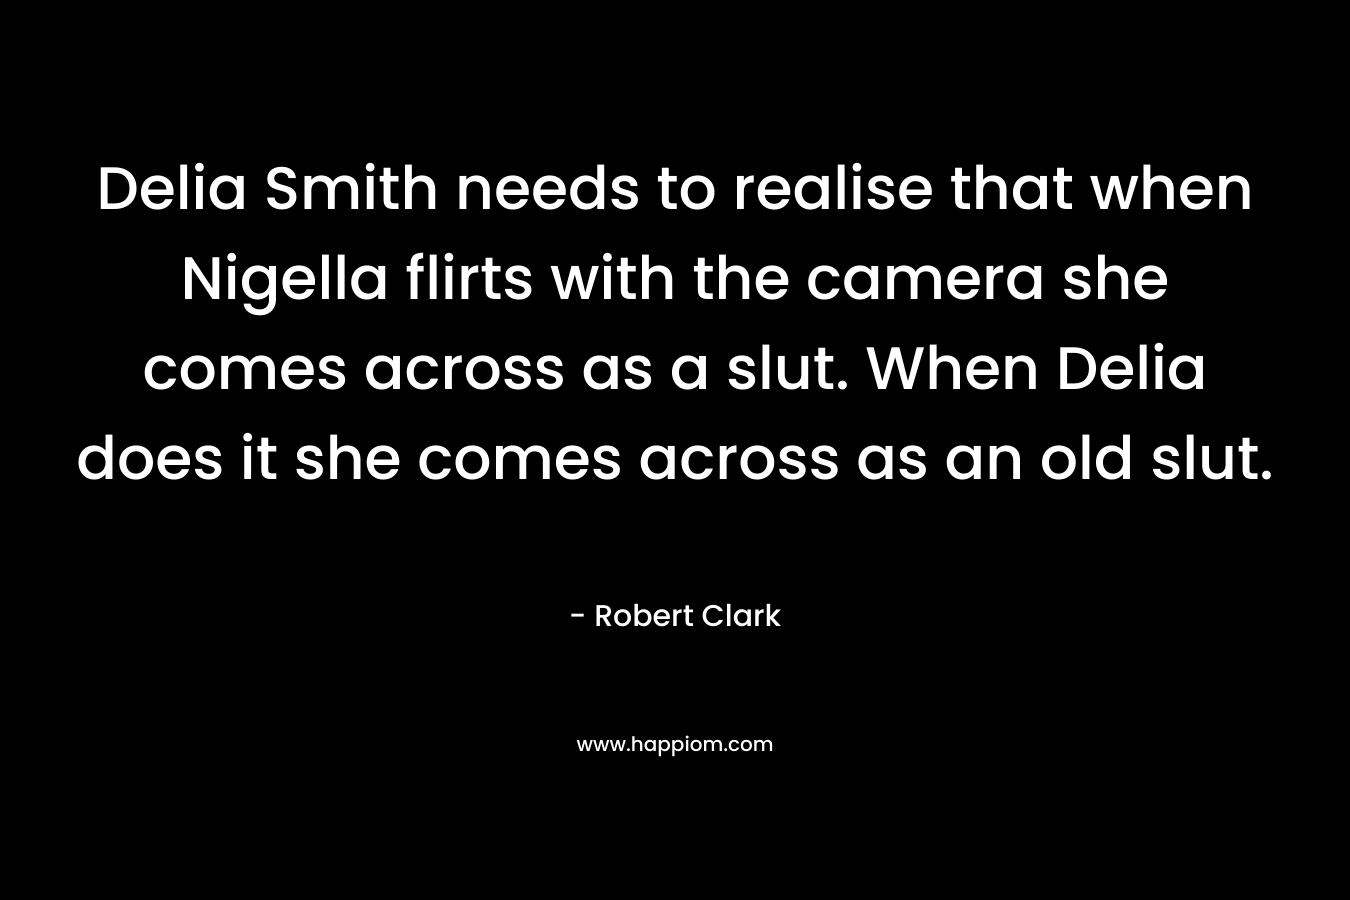 Delia Smith needs to realise that when Nigella flirts with the camera she comes across as a slut. When Delia does it she comes across as an old slut. – Robert Clark